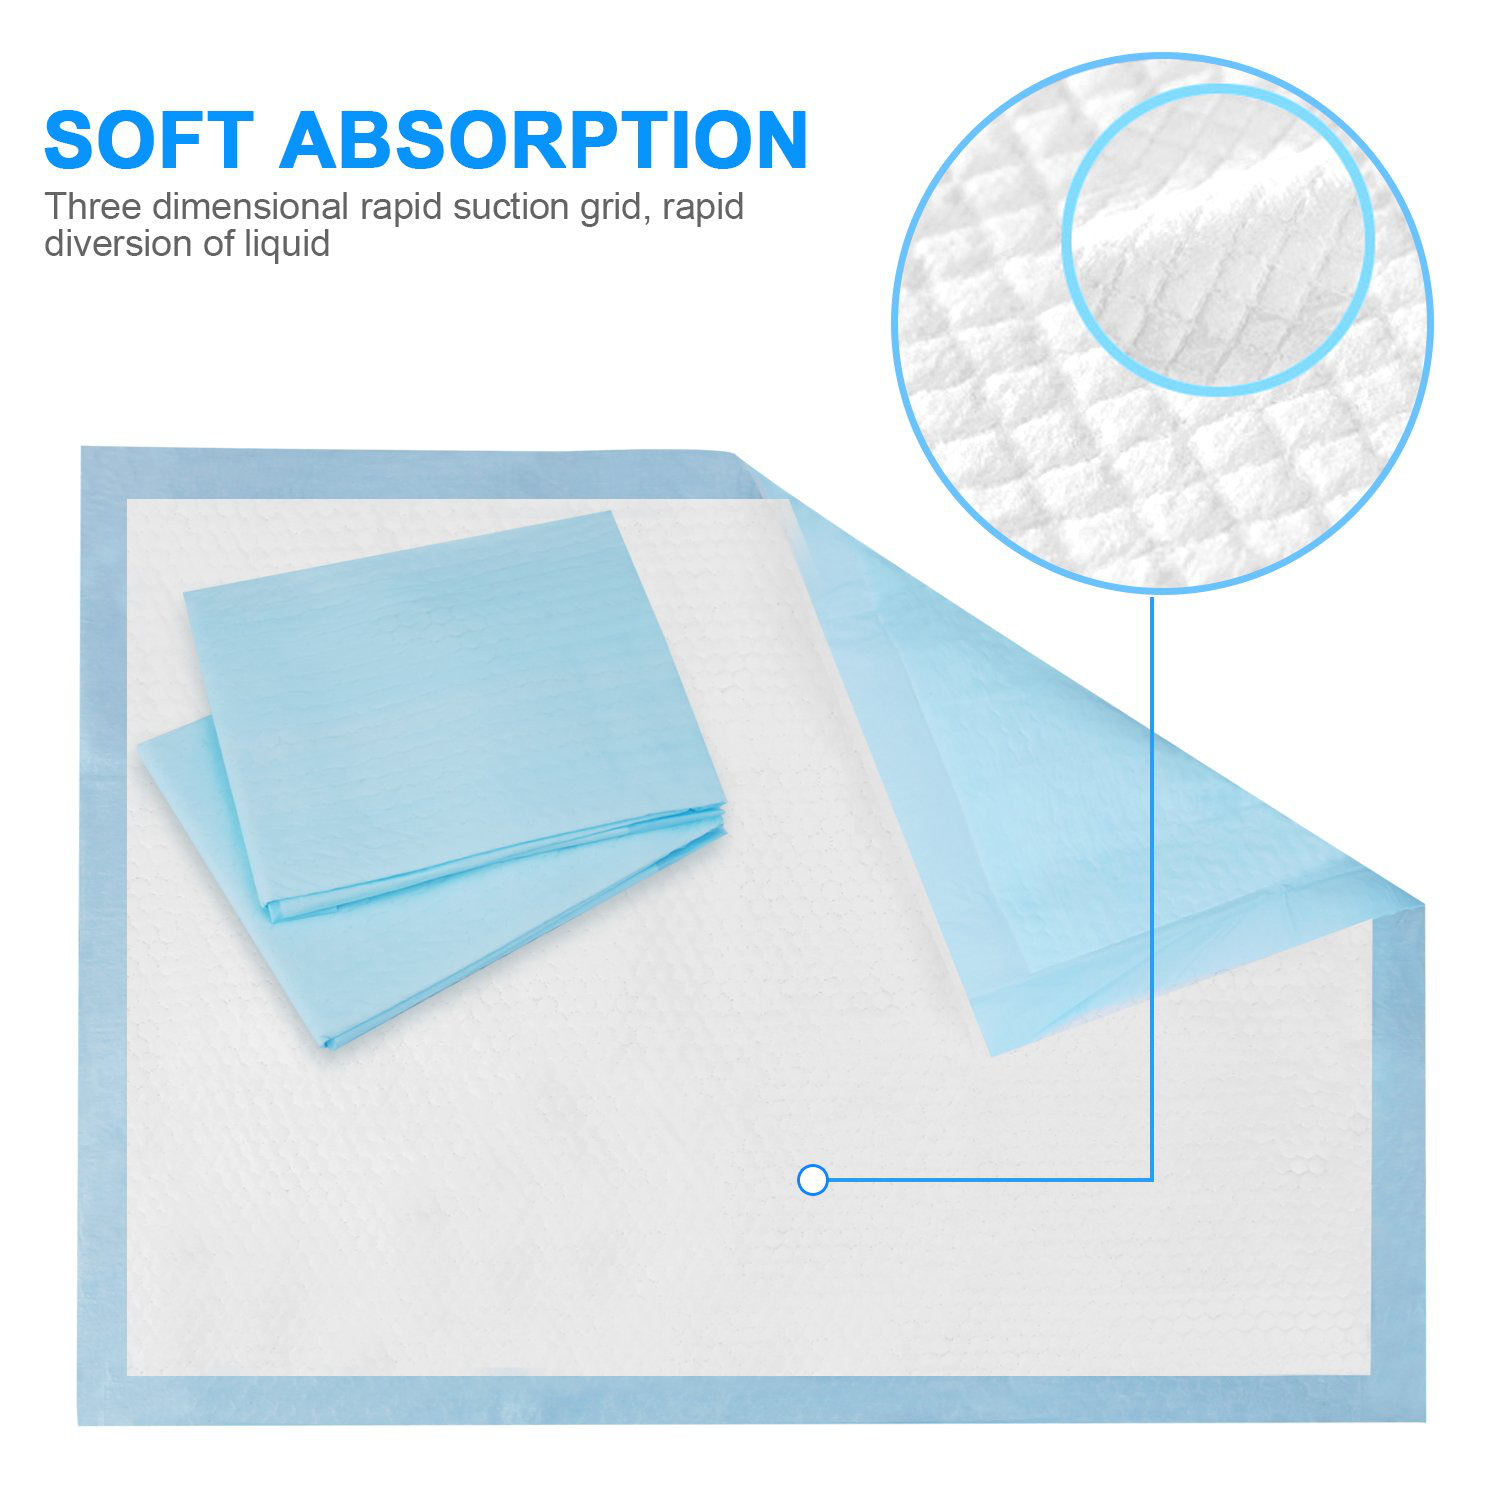 Disposable Large Changing Pads, High Absorbent Waterproof Portable Mattress, Leak-Proof Breathable Incontinence Pad, Play Sheet Bed Chair Table Mat Protector, Adult Child Baby Pets Underpad